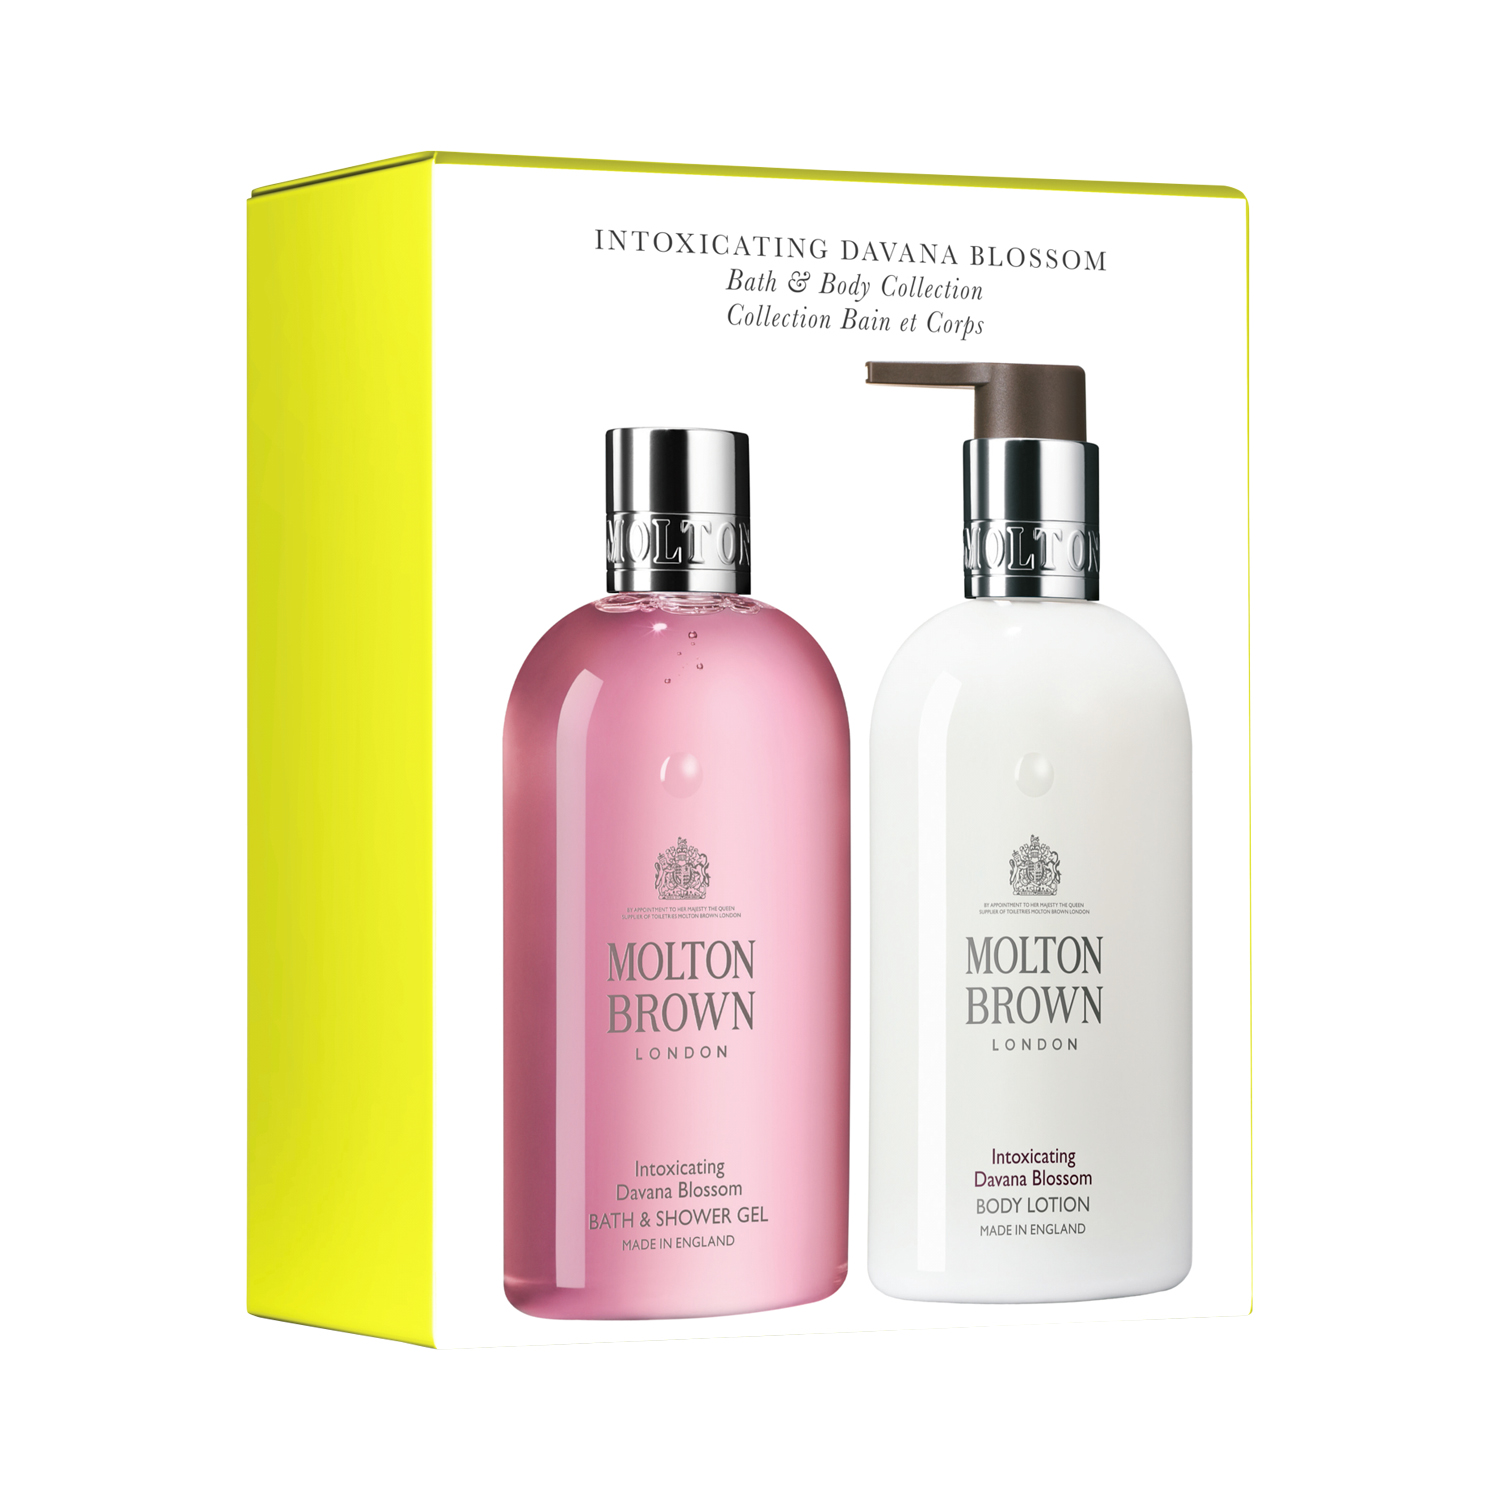 Molton Brown - Intoxicating Davana Blossom Bath & Body Collection - 2-teiliges Körperpflegeset